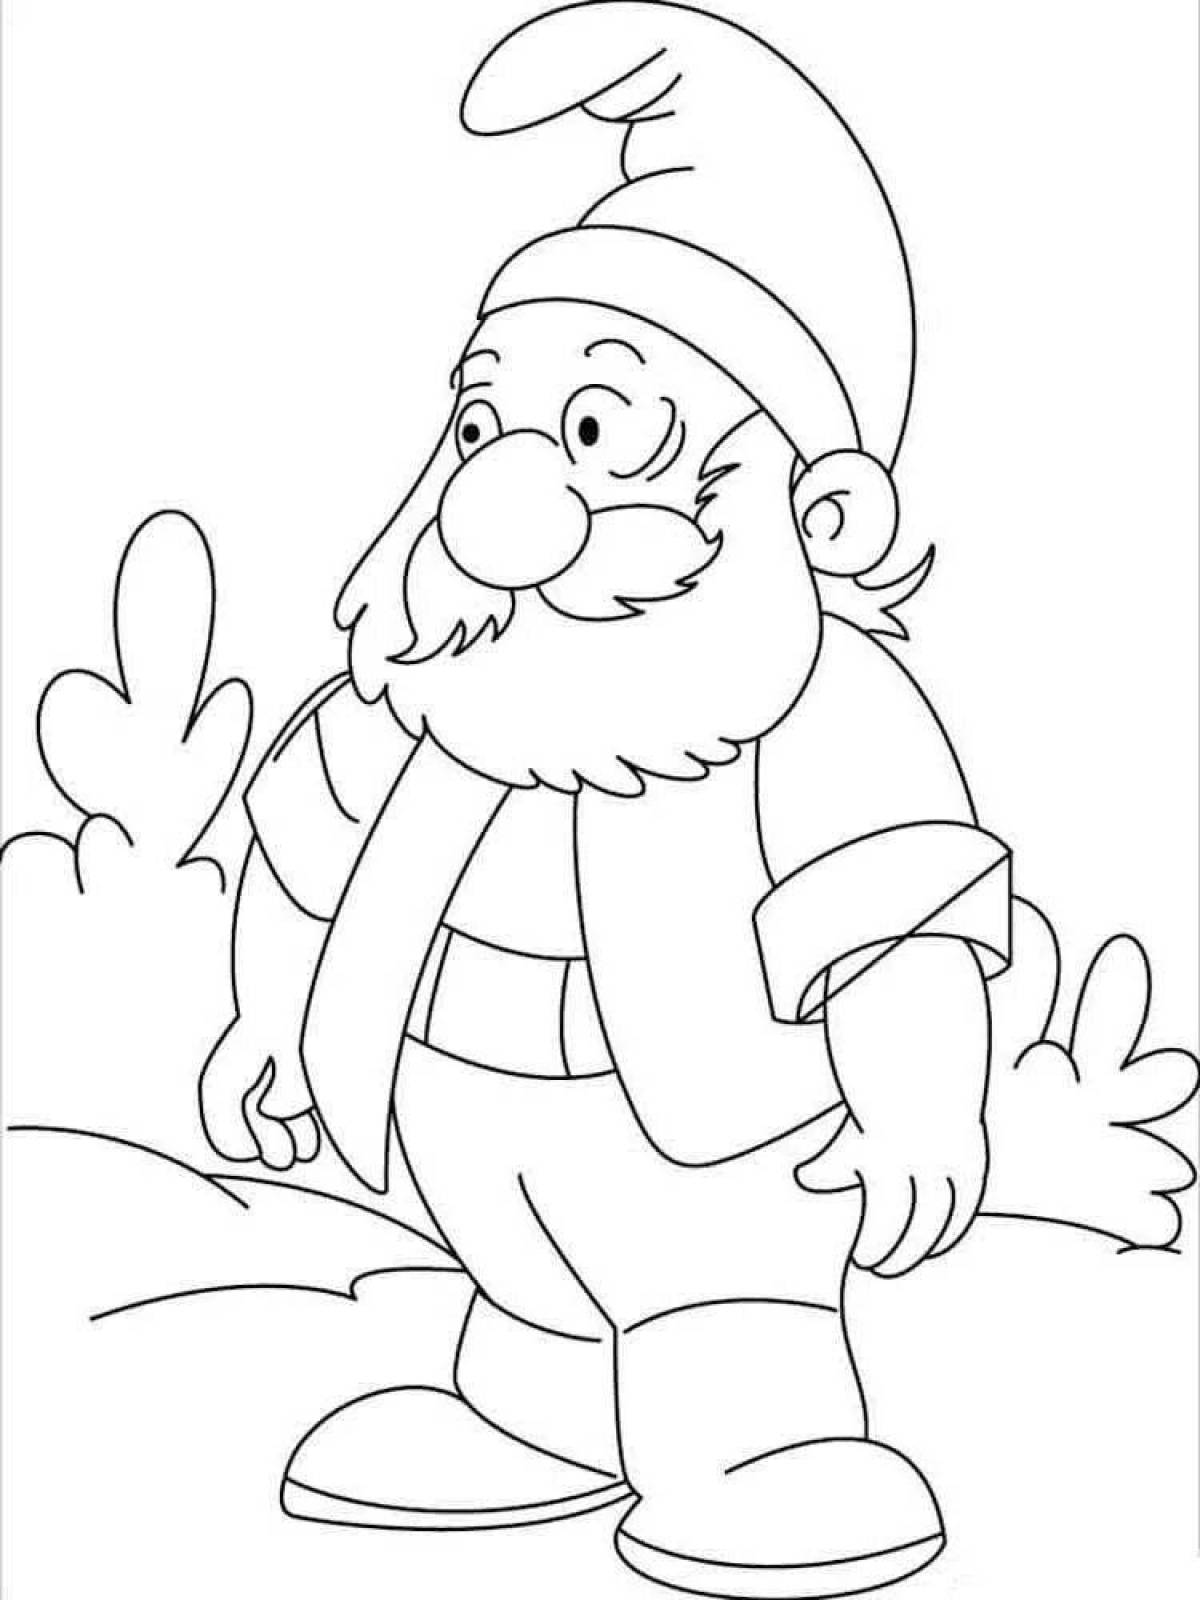 Coloring page dazzling dwarf